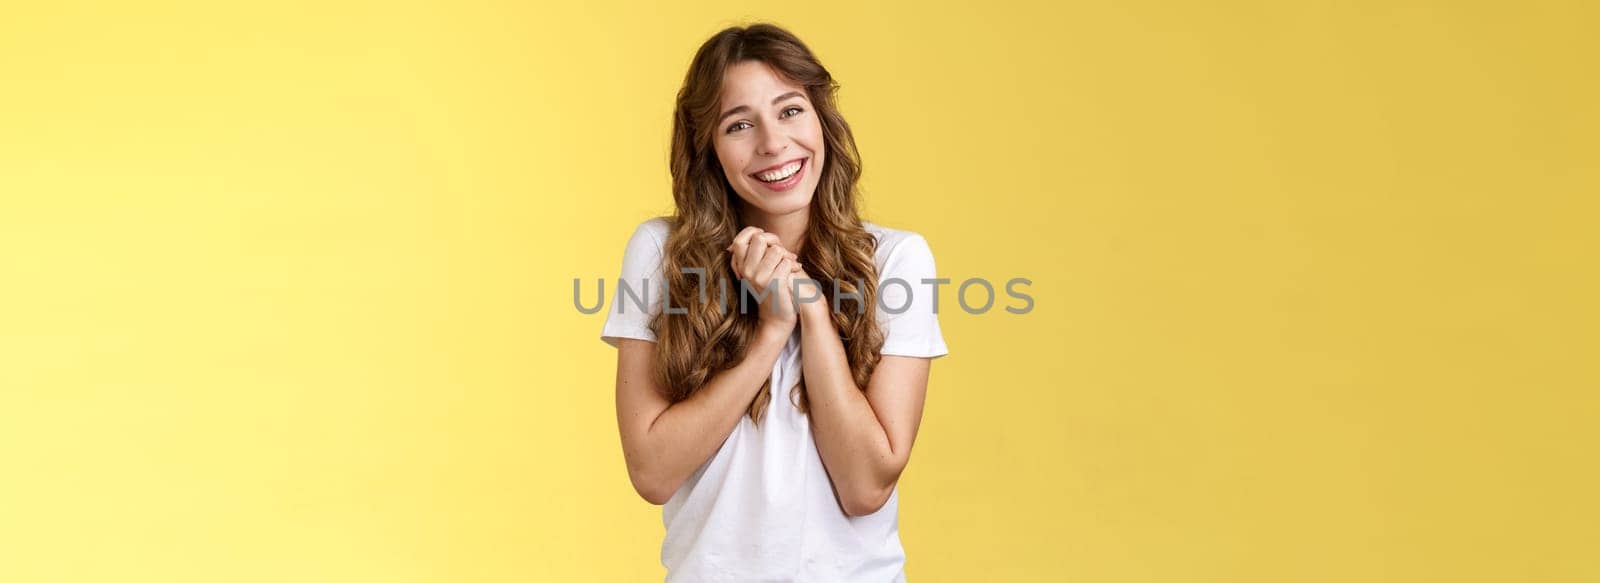 Tender lovely cute curly-haired girlfriend sighing happily clasp hands togehter appreciate touching perfect gift tilt head smiling broadly grateful thanking effort stand pleased yellow background. Lifestyle.